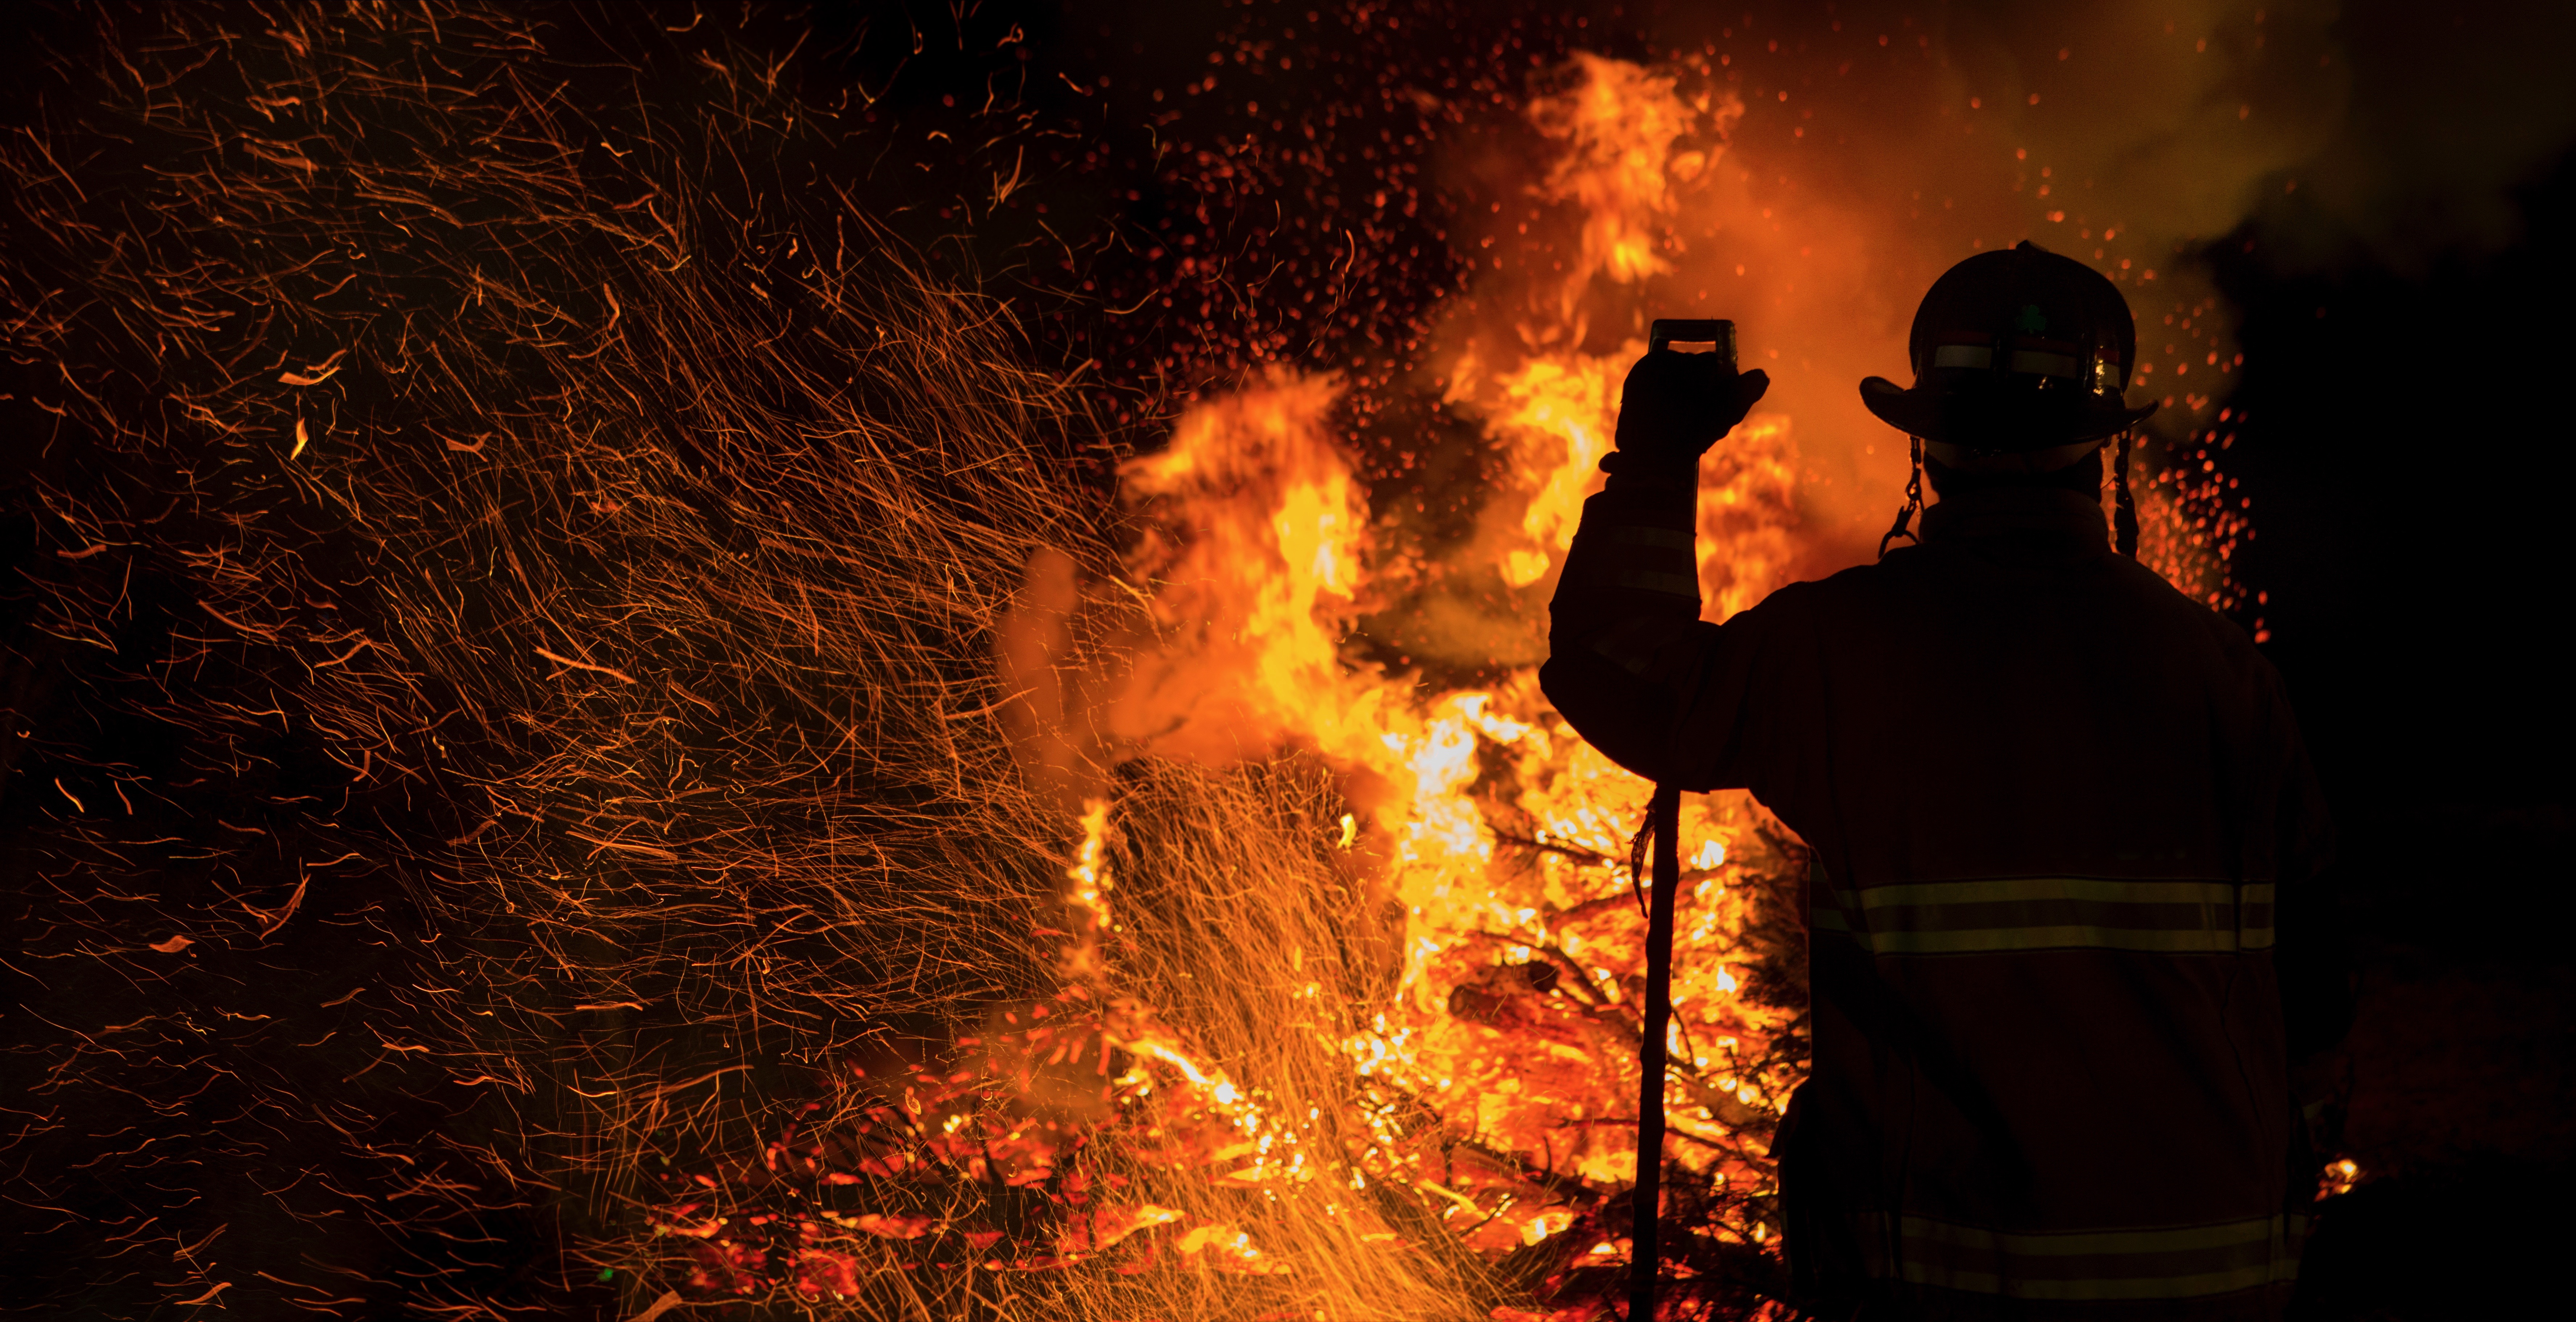 Particles of a non-toxic flame suppressor, originally designed for use on the launchpad, can now be licensed for firefighting purposes. Credit: Peterfactors via Getty Images